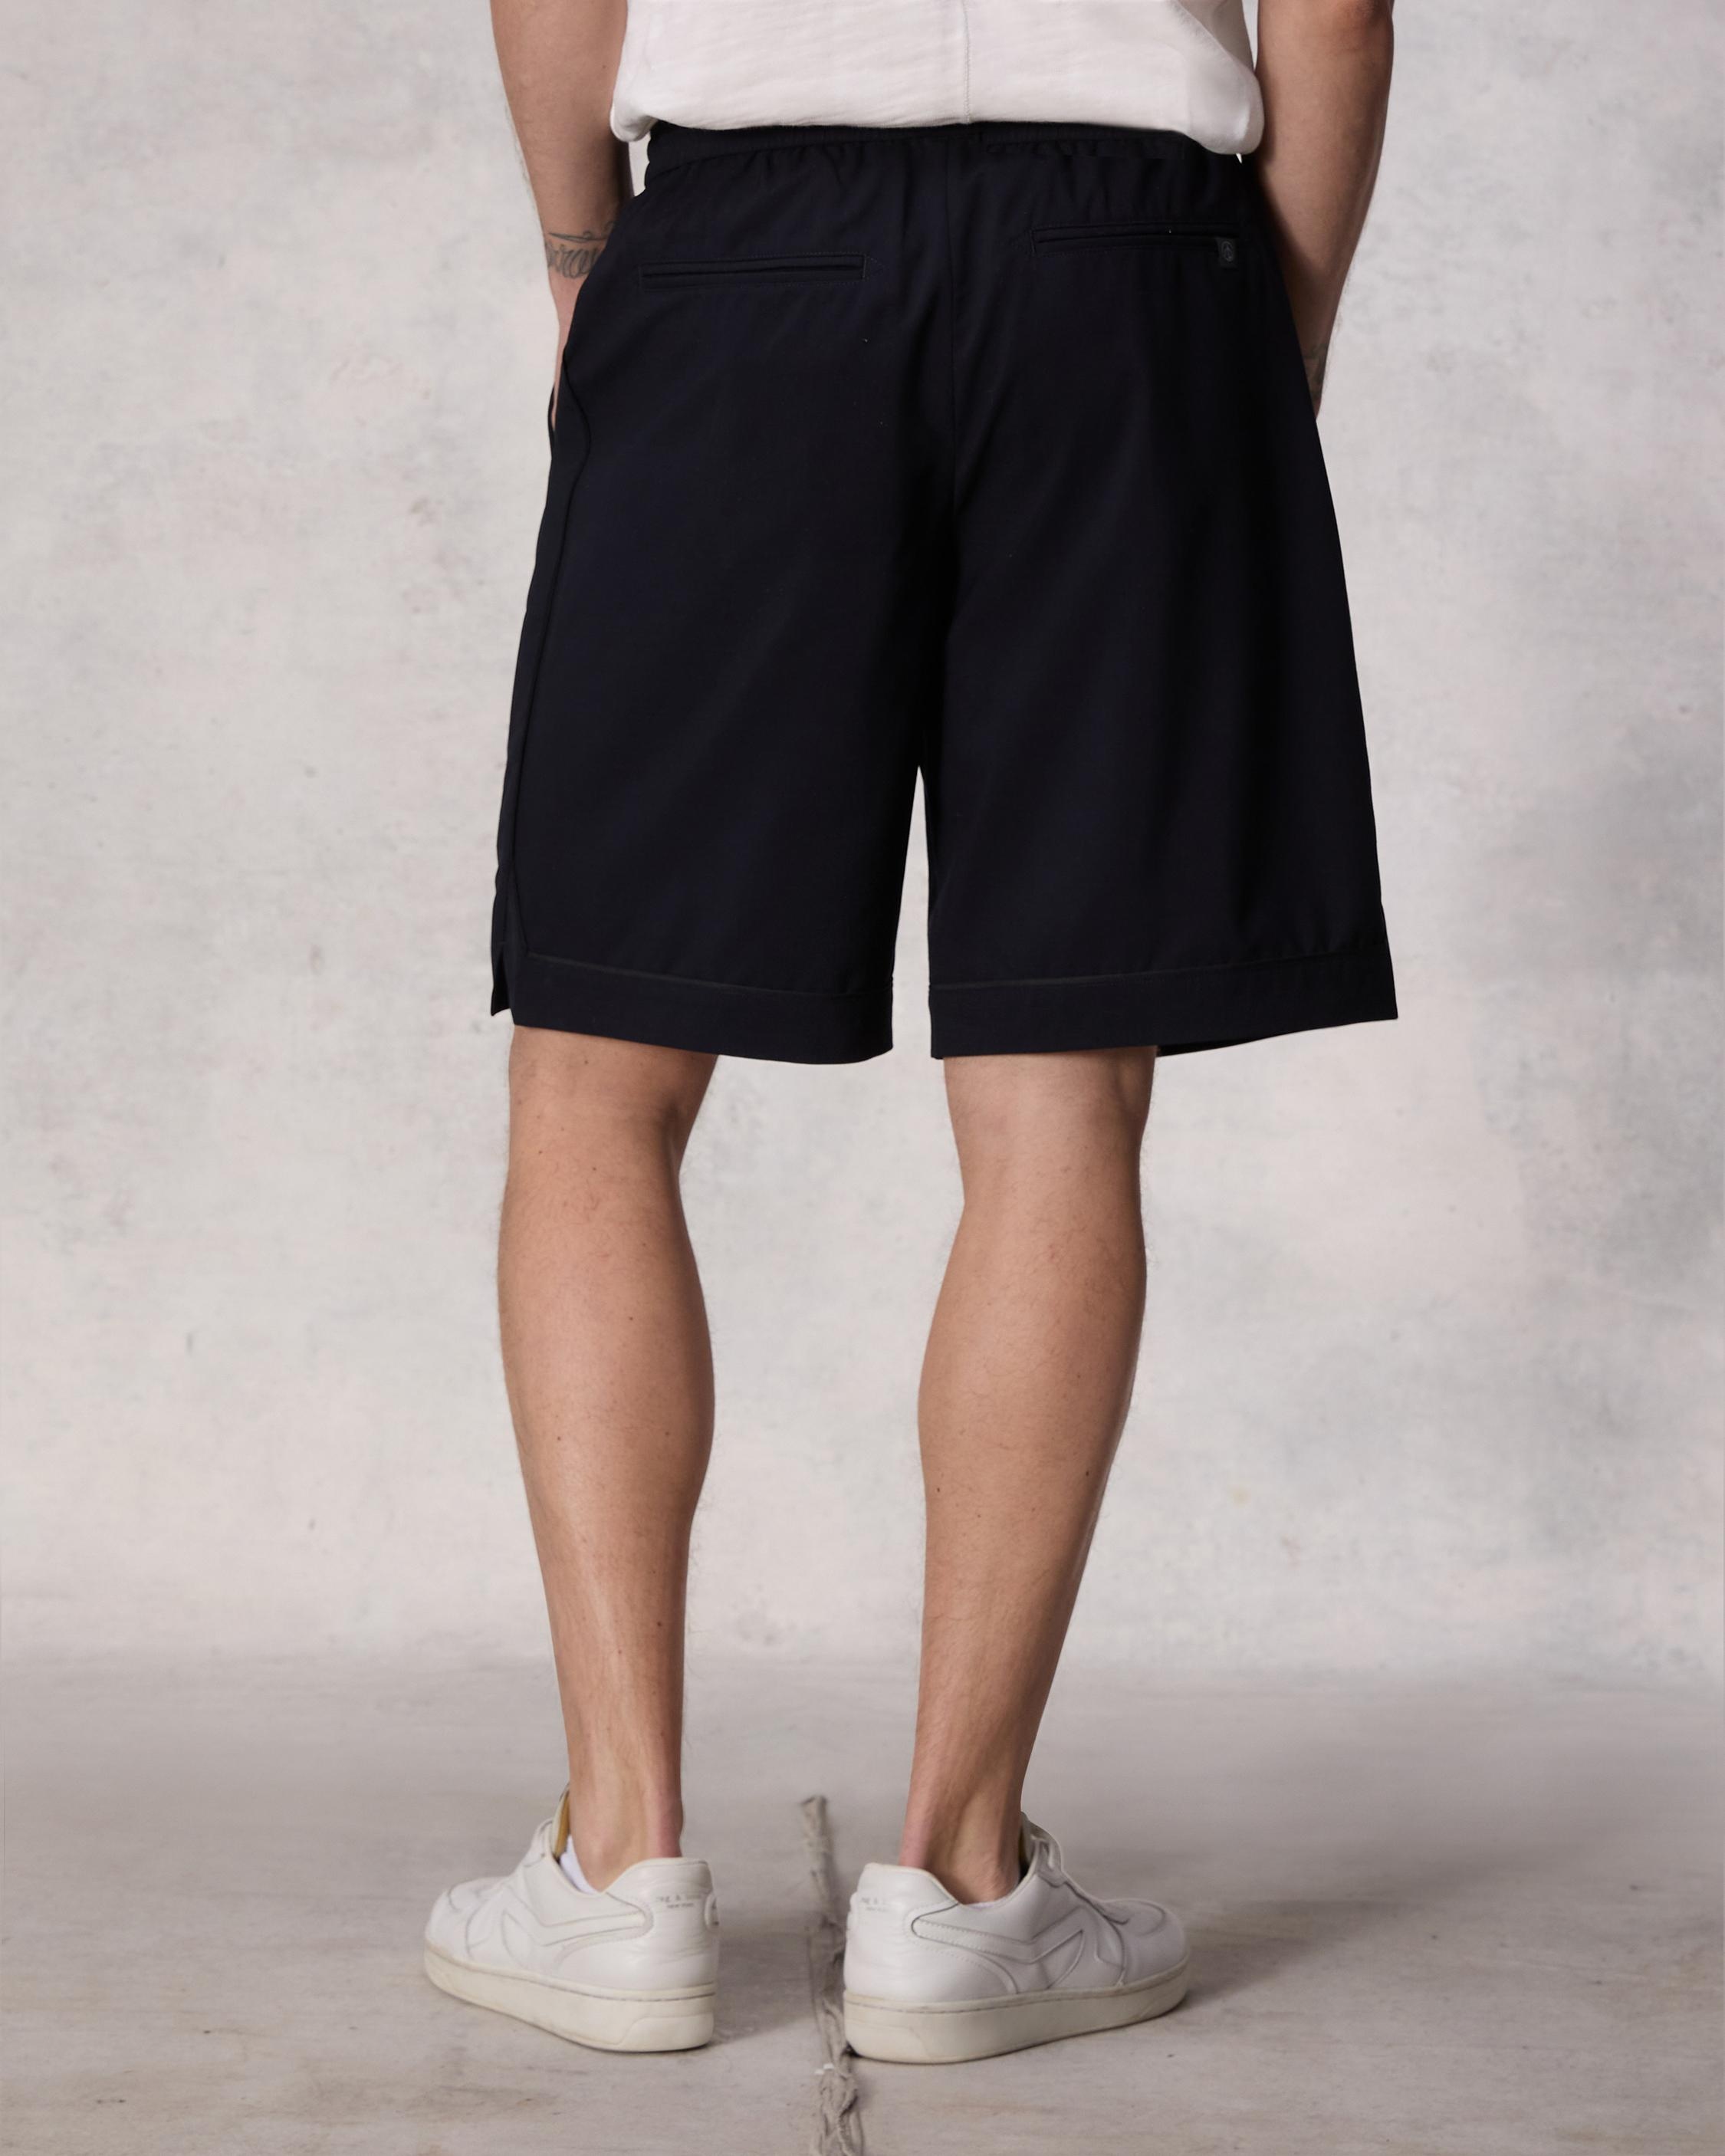 Irving Wool Short
Relaxed Fit - 4